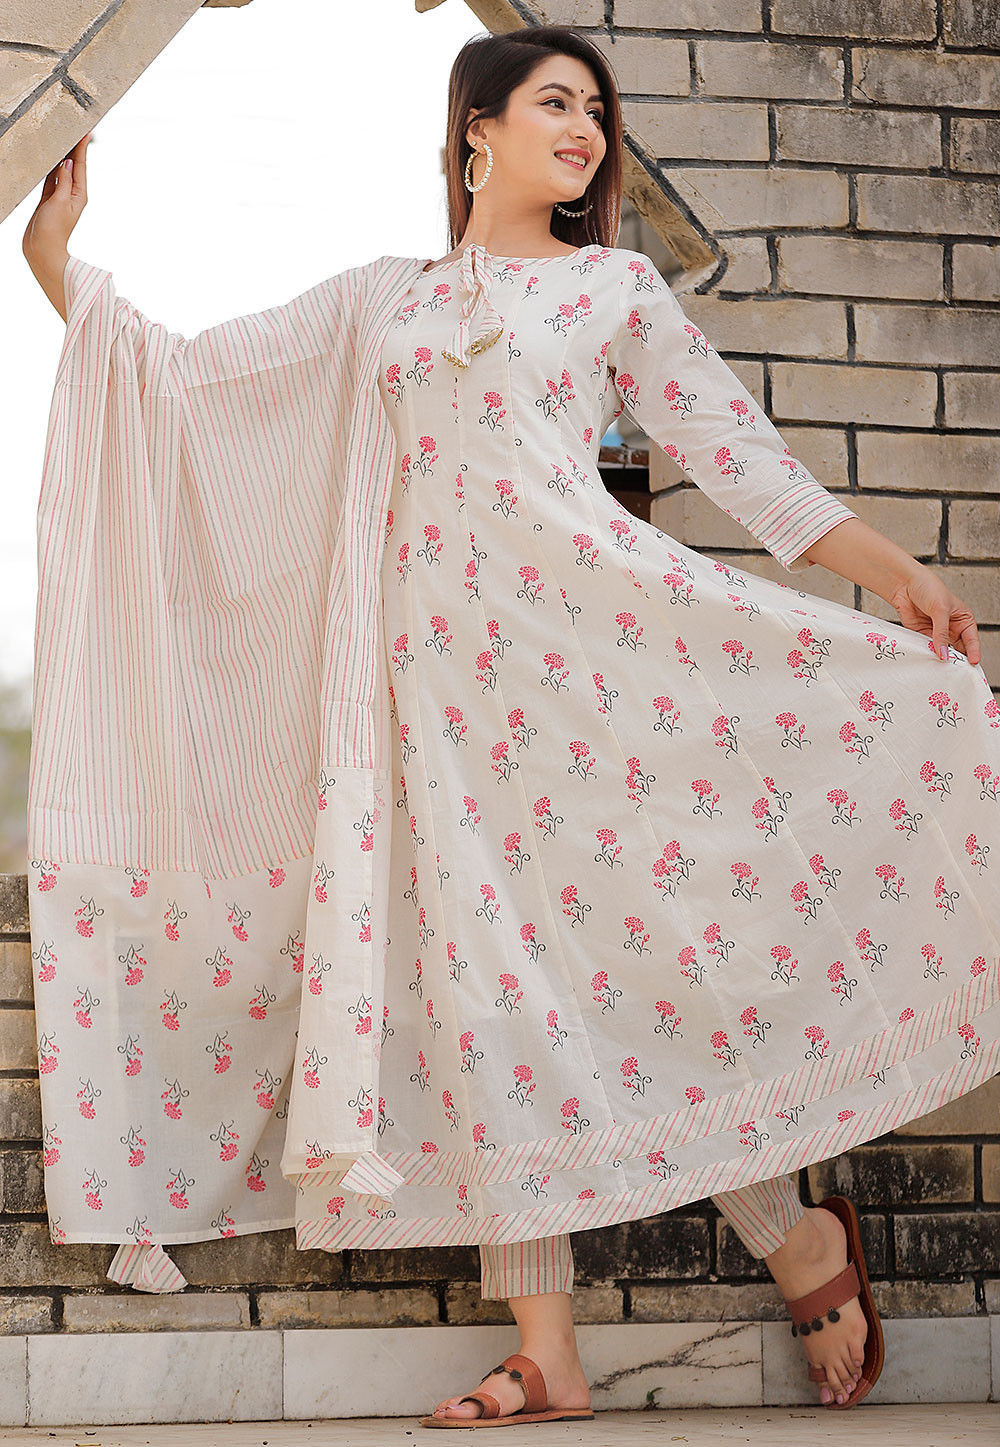 cotton printed frock suit